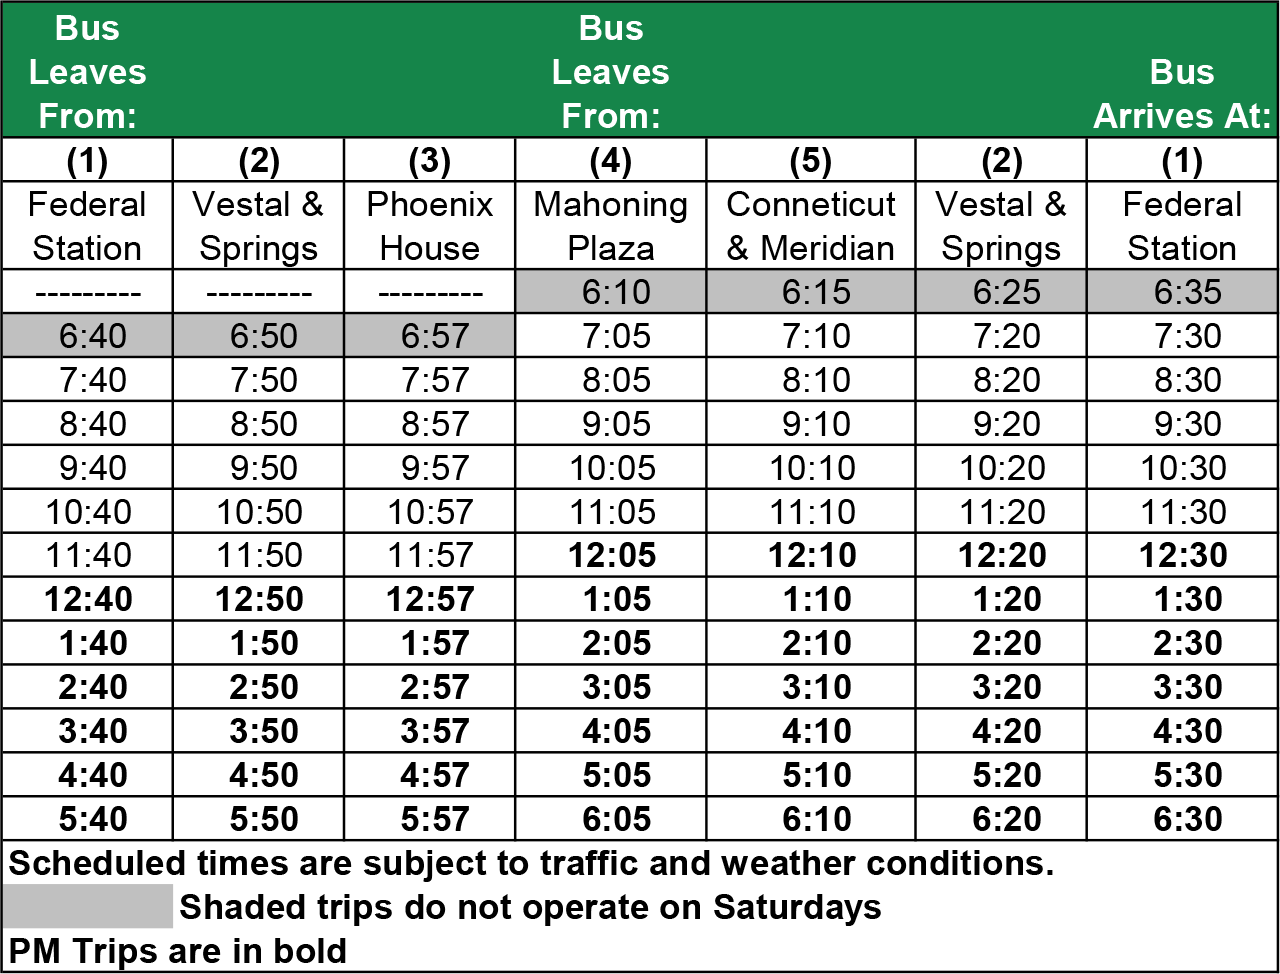 34 bus route schedule – collections photos bus